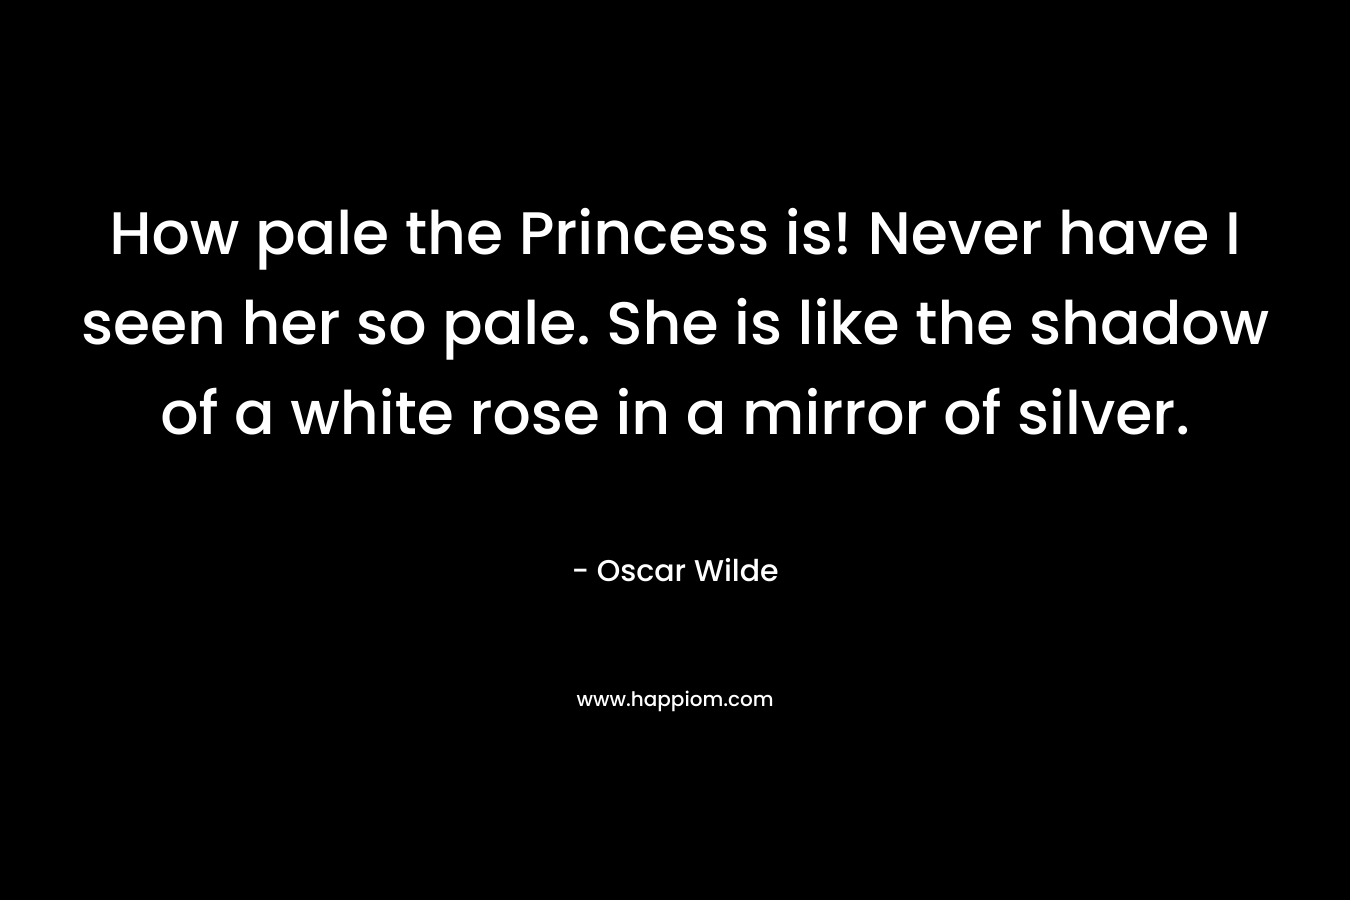 How pale the Princess is! Never have I seen her so pale. She is like the shadow of a white rose in a mirror of silver. – Oscar Wilde